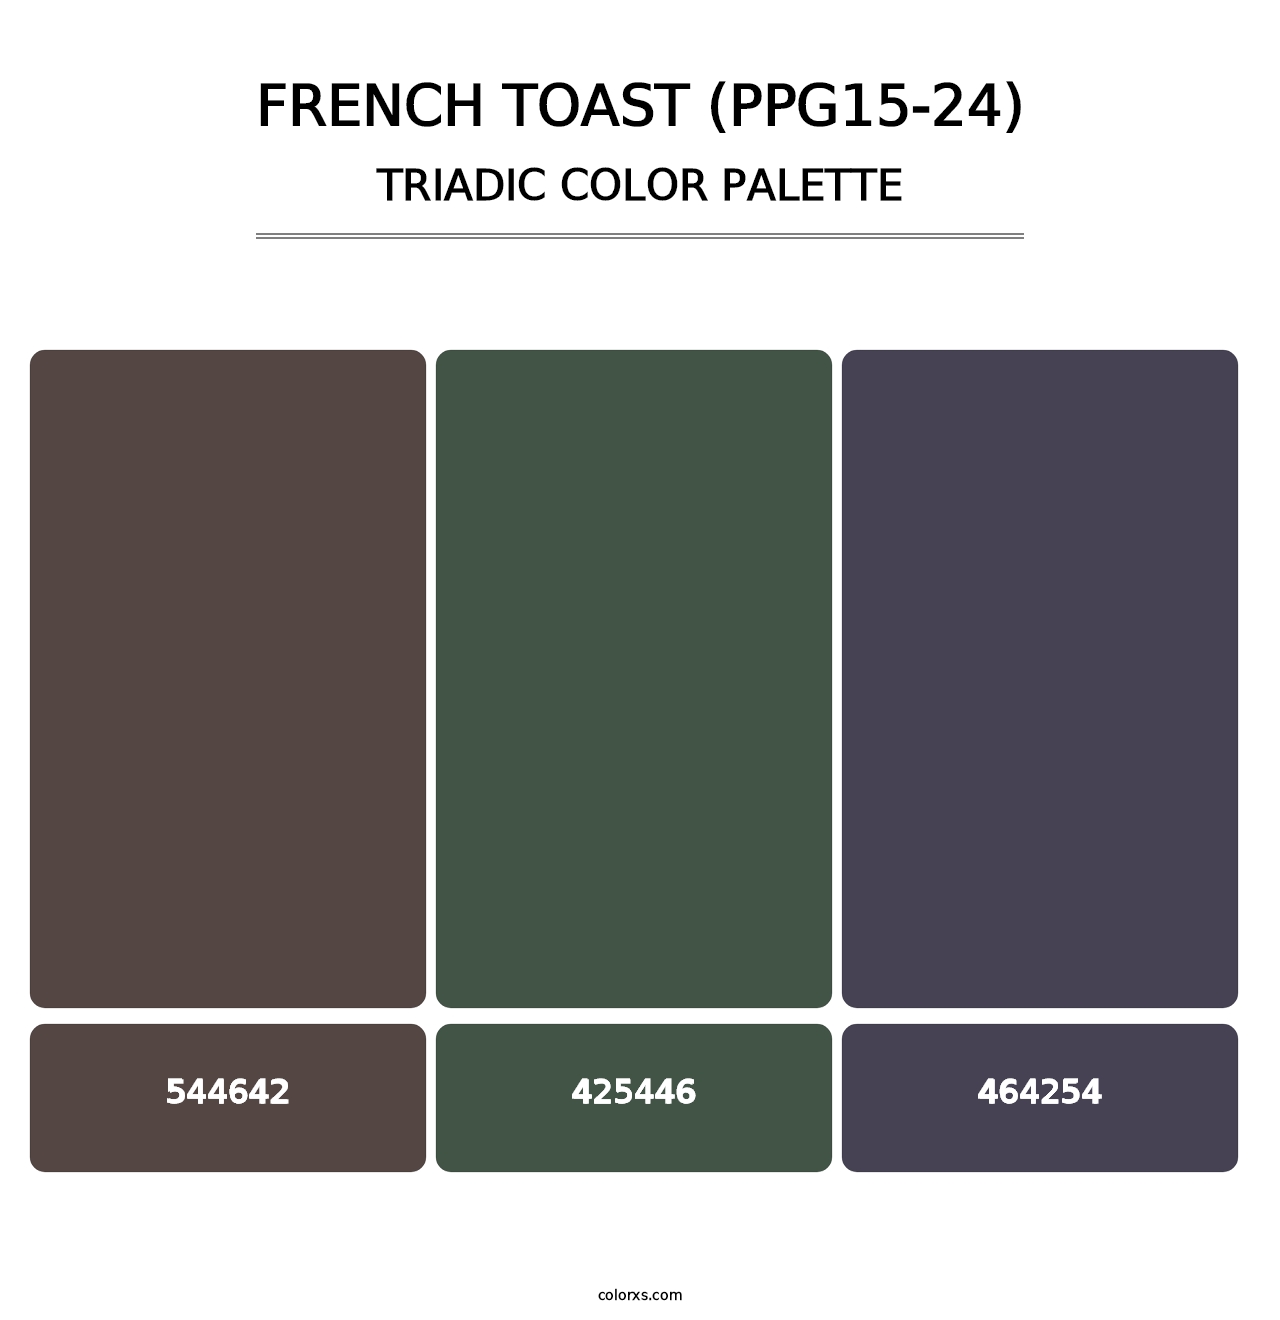 French Toast (PPG15-24) - Triadic Color Palette